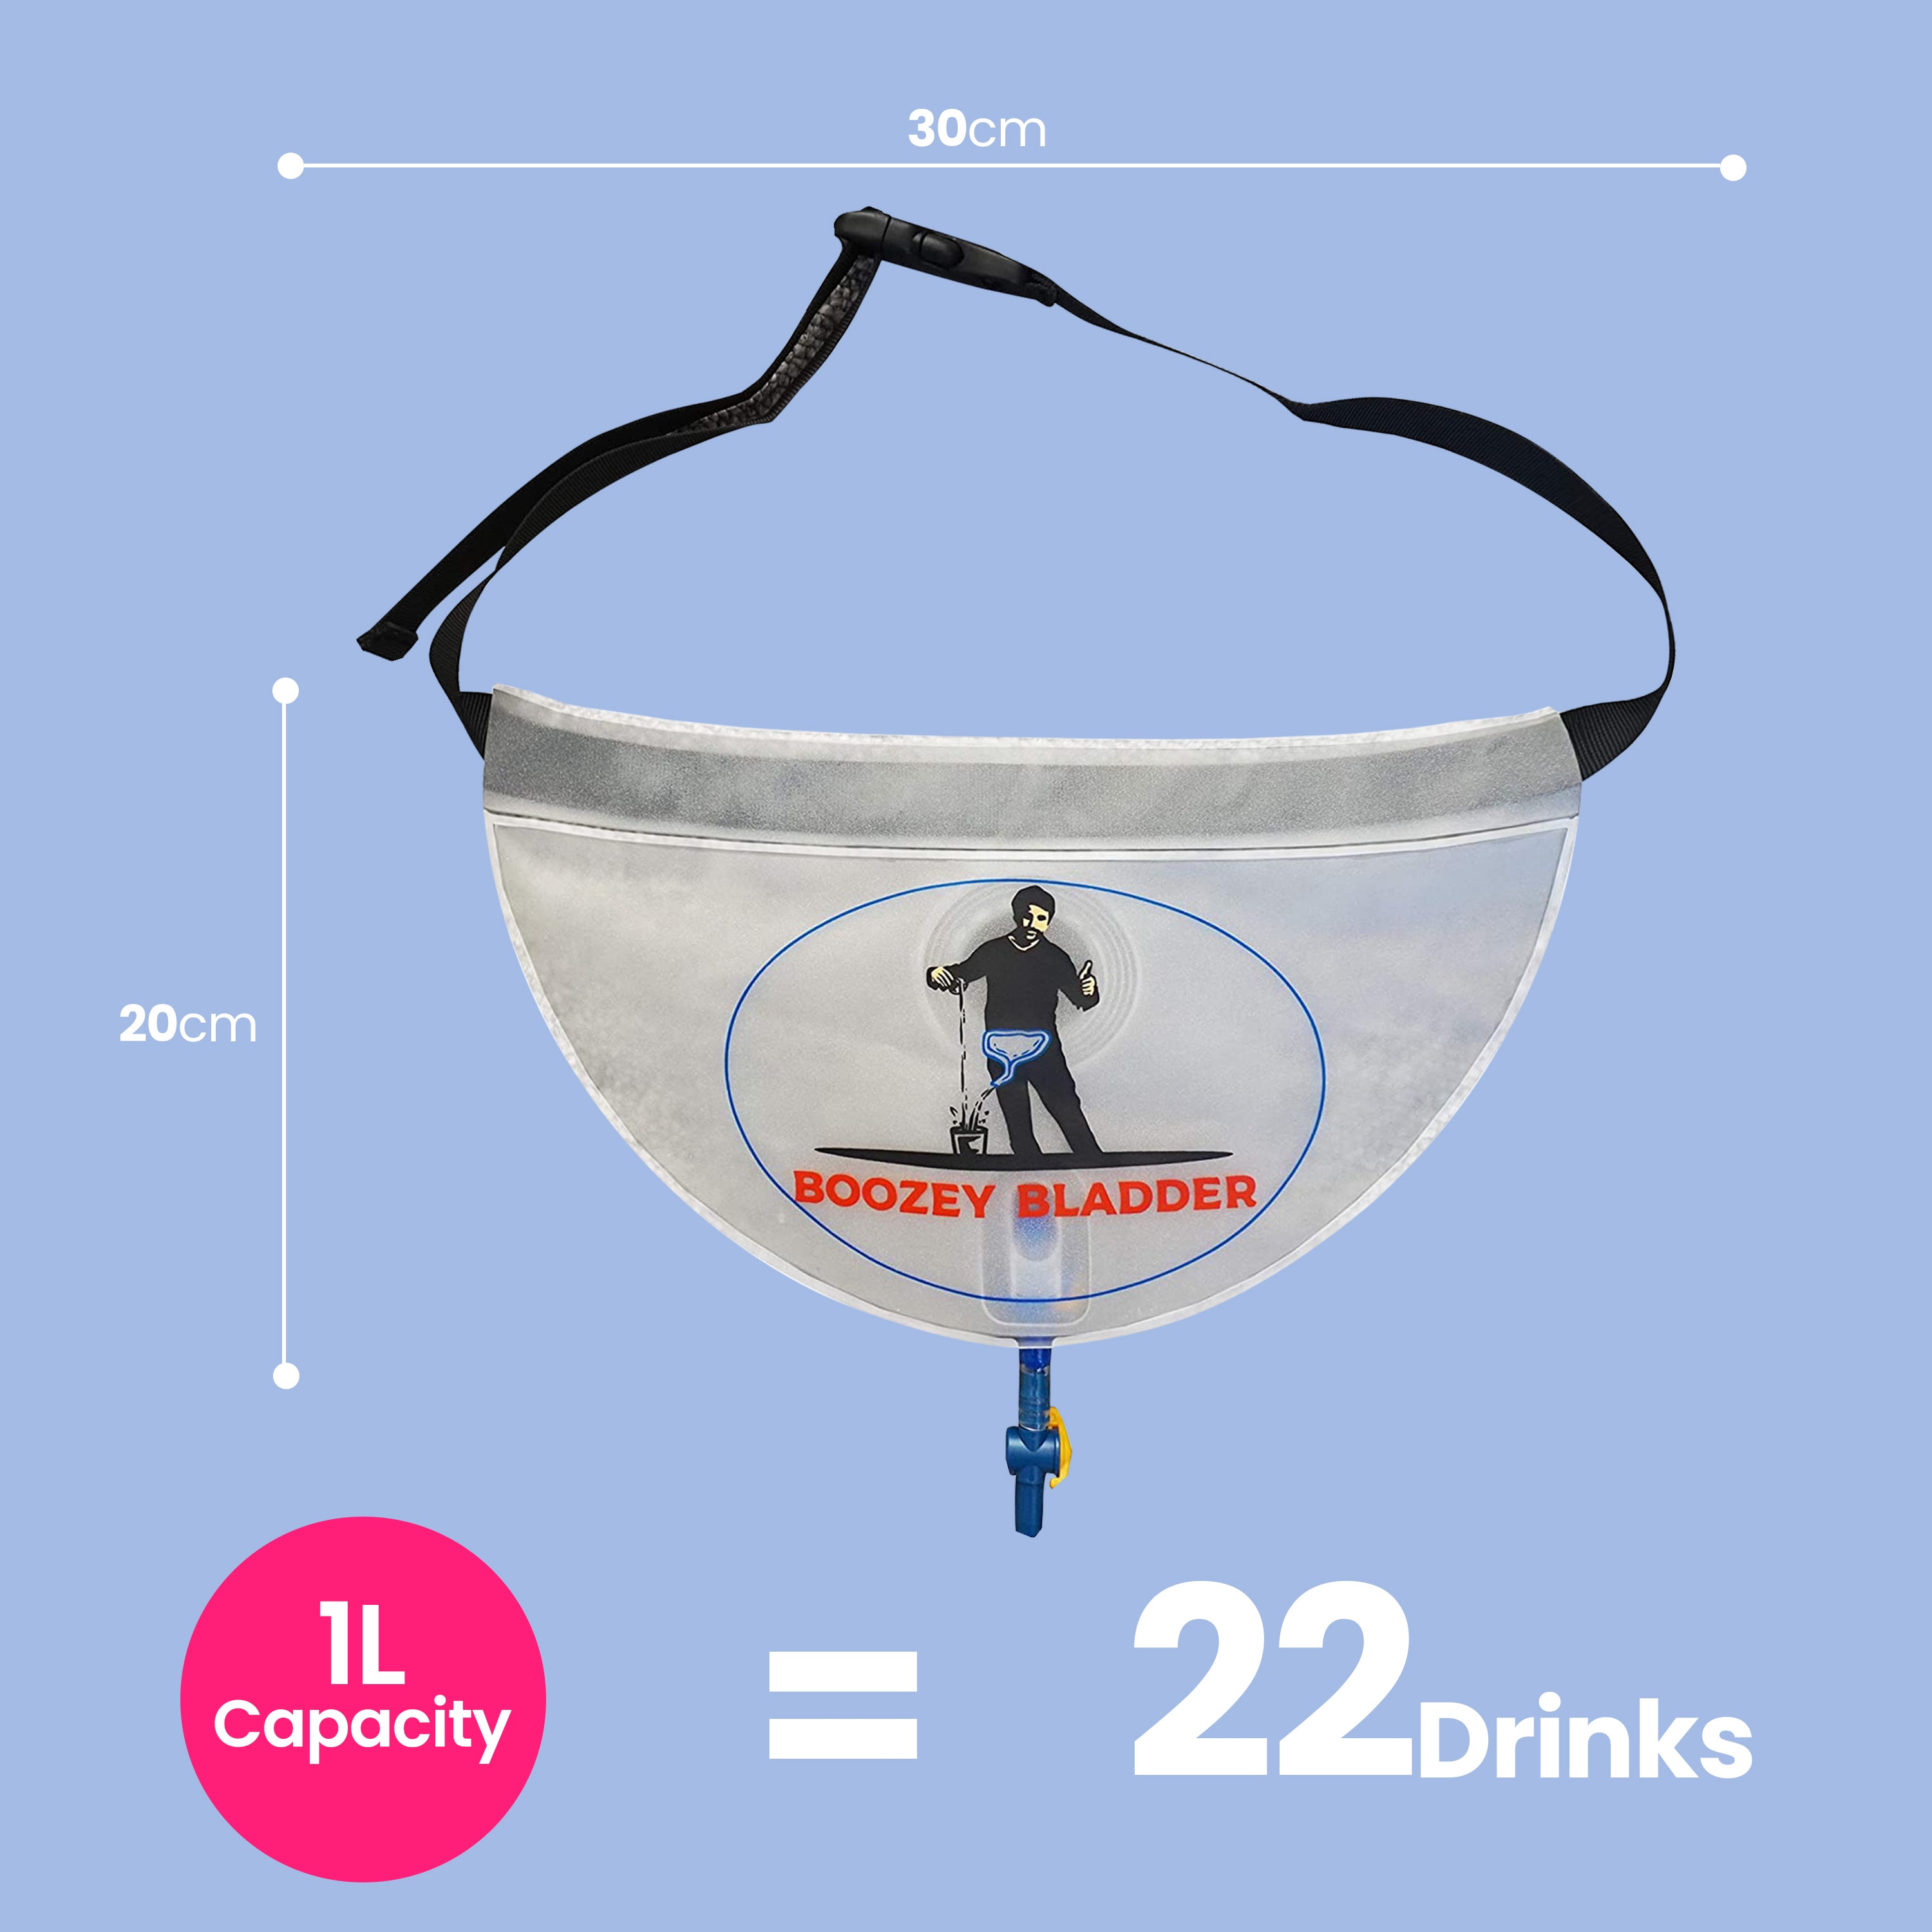 Secret Flask - Boozey Bladder - 33 Oz Capacity - High Quality, Covert Secret Flask to Sneak Your Liquor into Any Event